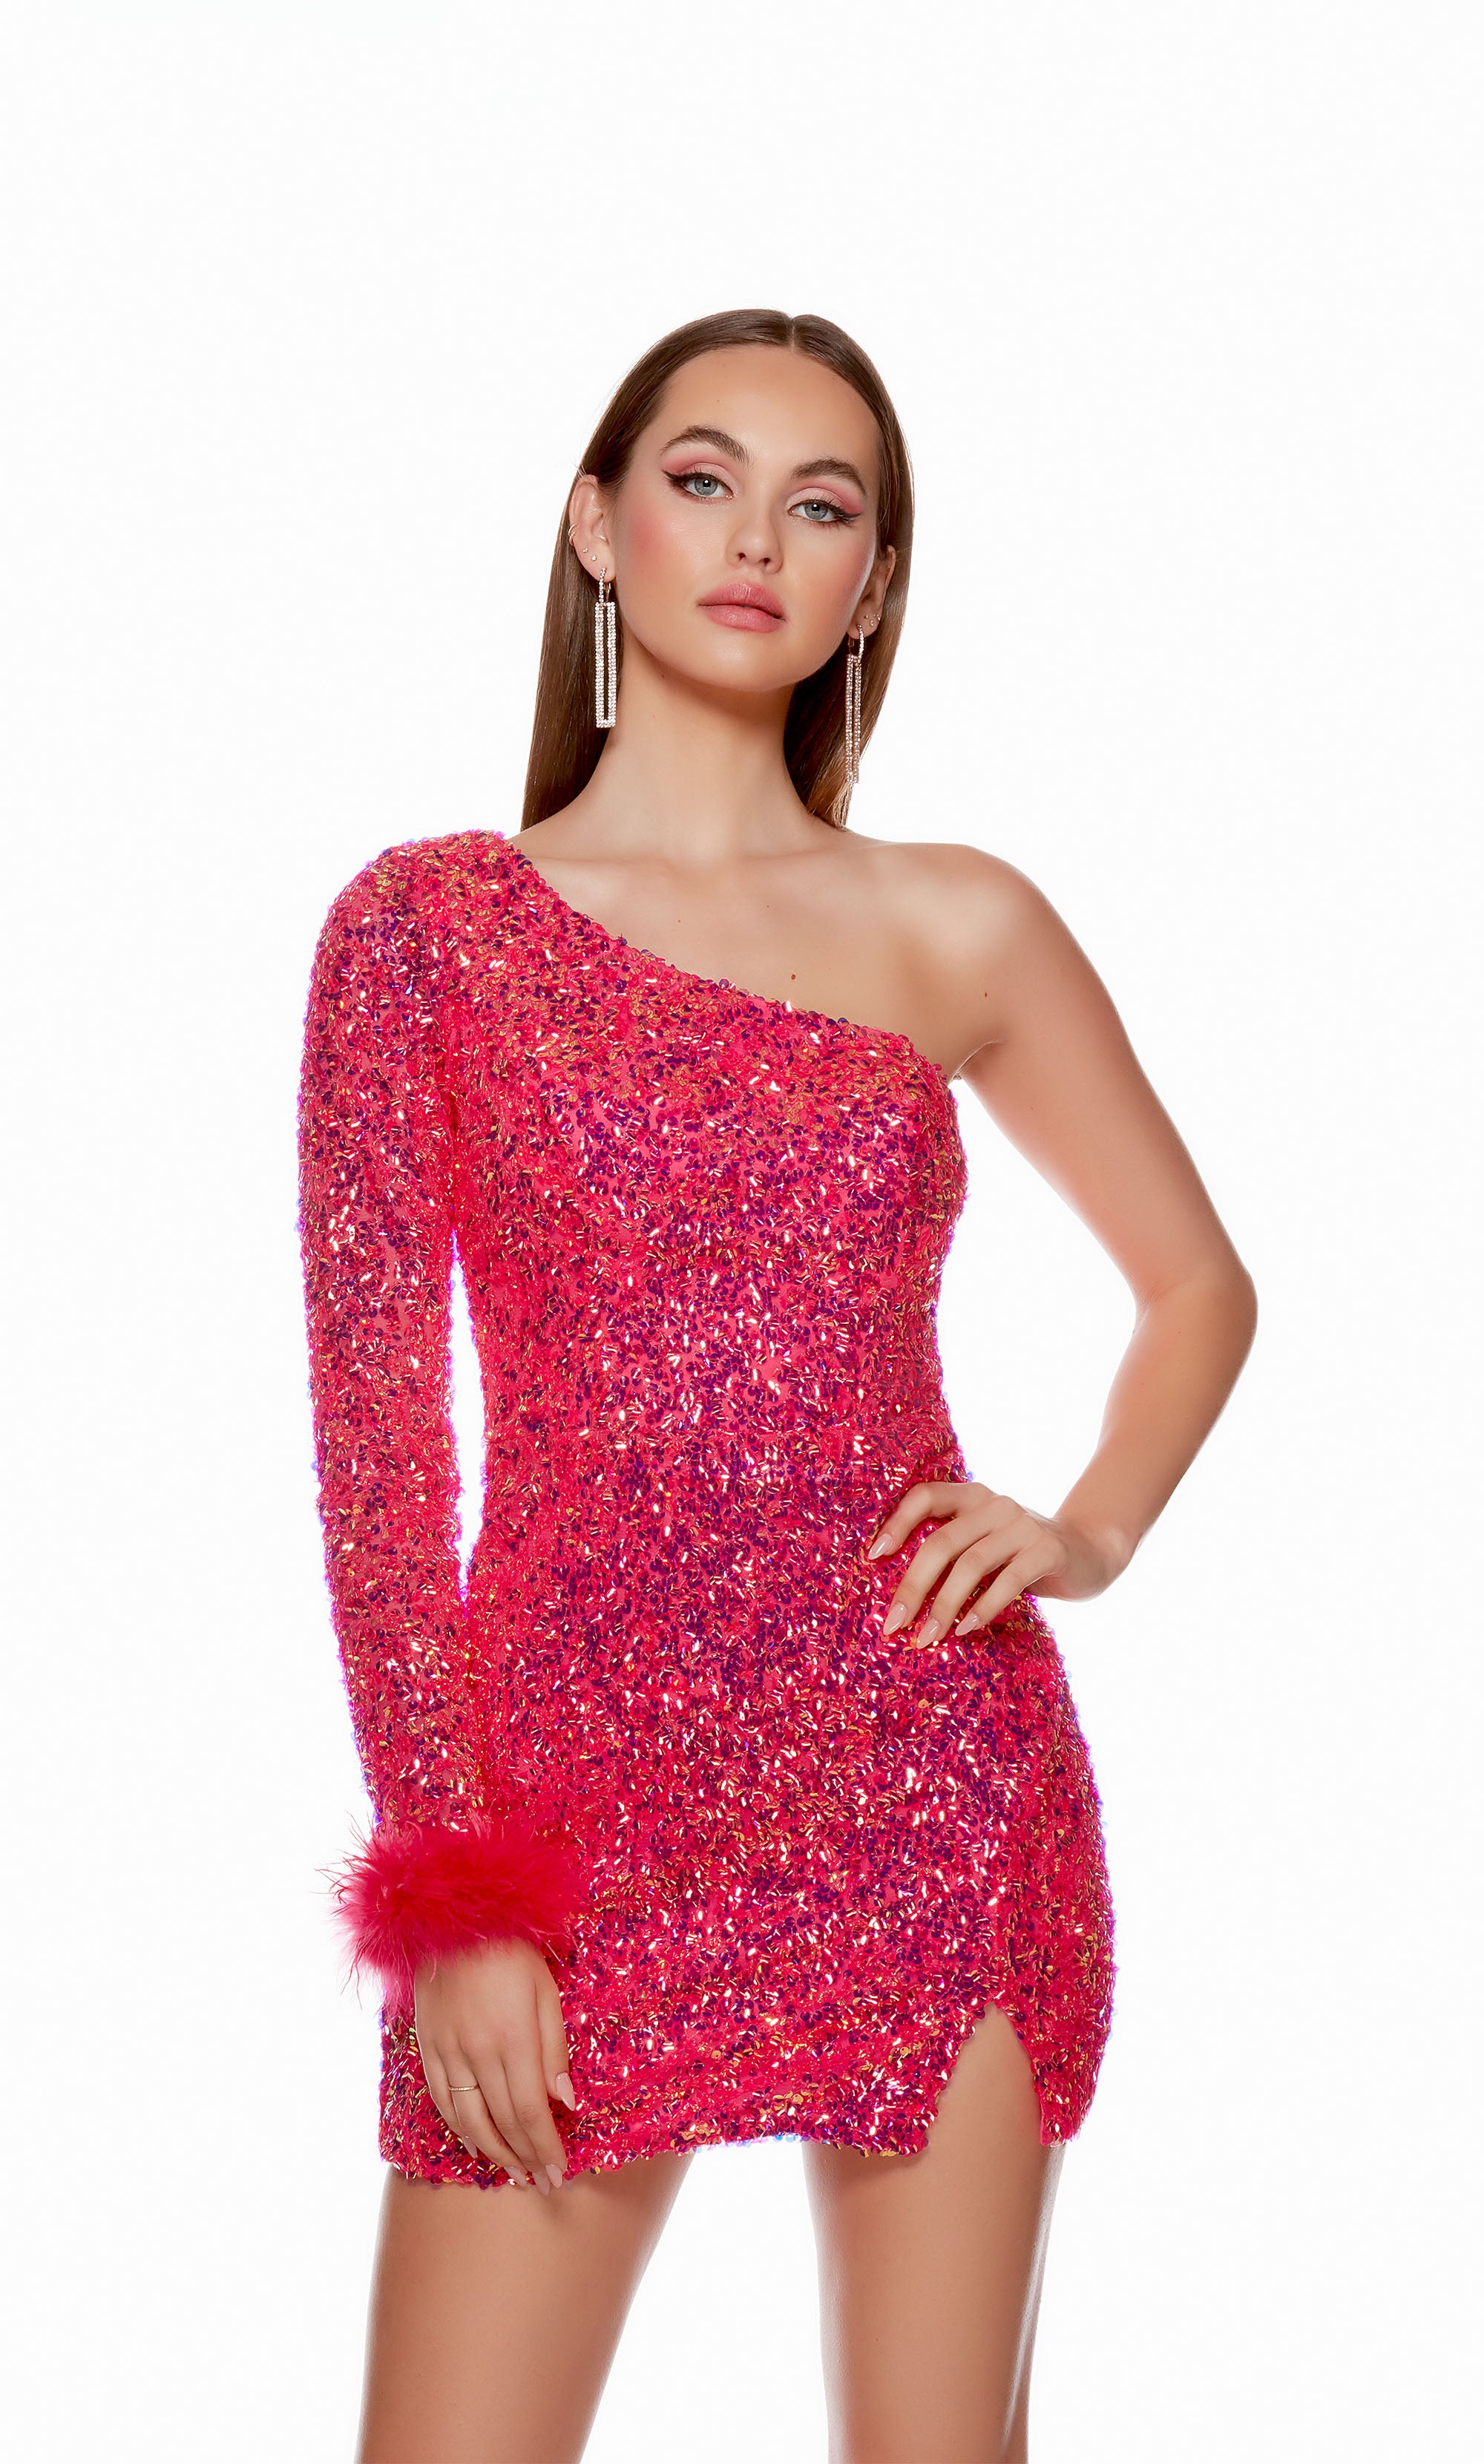 A glamorous hot pink dress crafted from a sparkly, iridescent sequin fabric. The dress spotlights a trendy, one-shoulder neckline, side slit, and feather-trimmed cuff to complete the fun look.